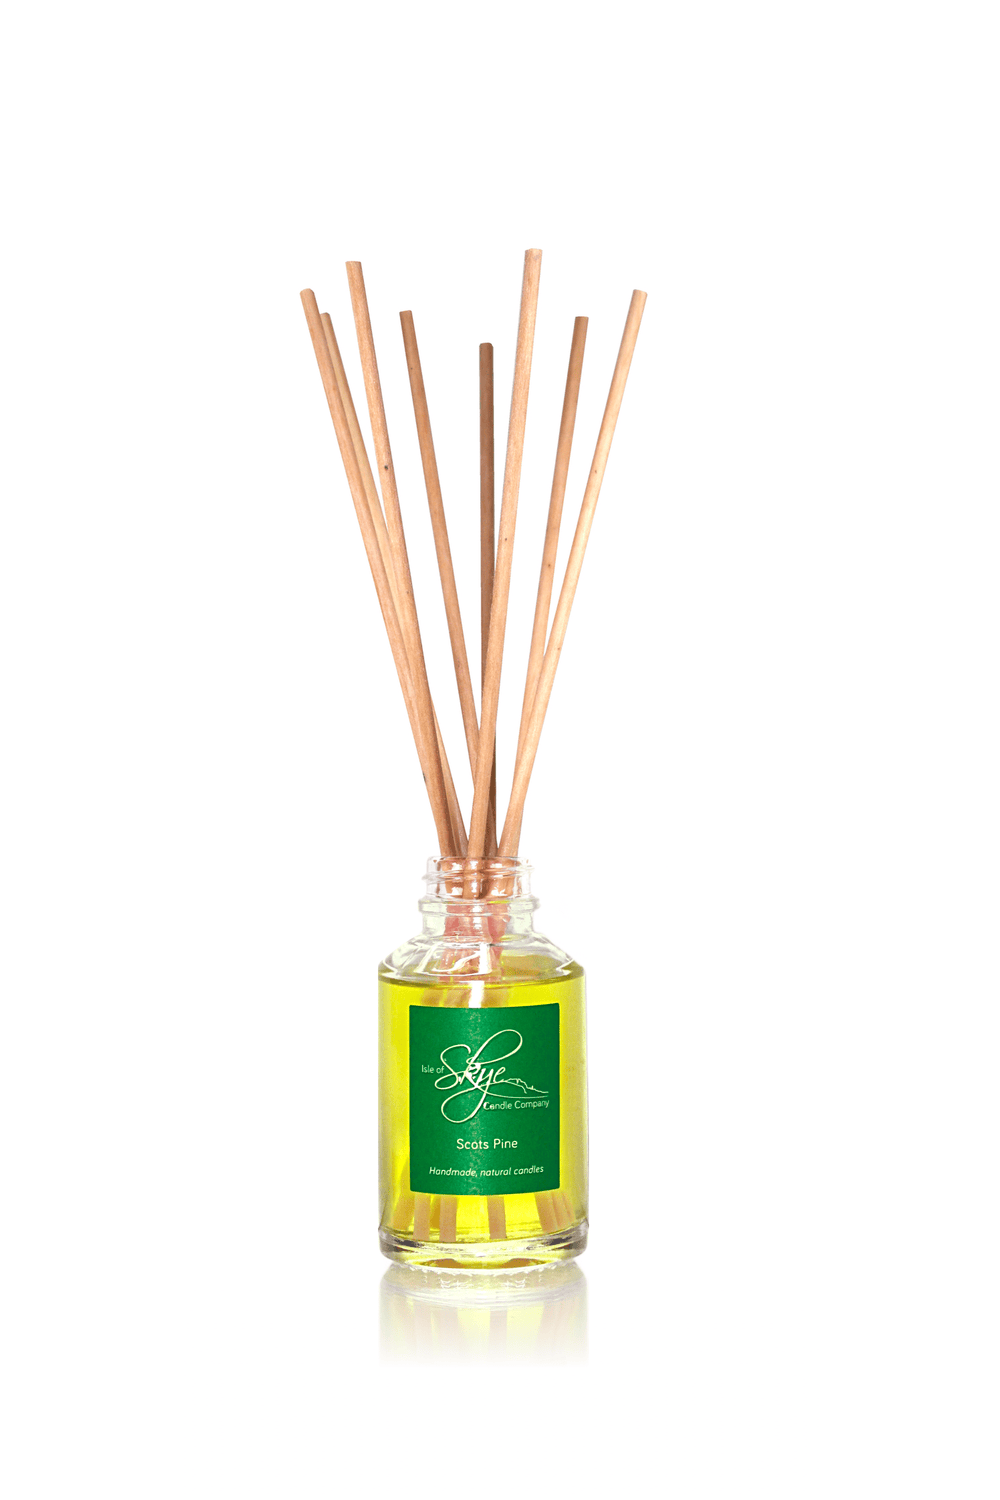 Mood_Company Isle of Skye Candle De beste Dennengeur (Scots Pine) Reed Diffuser